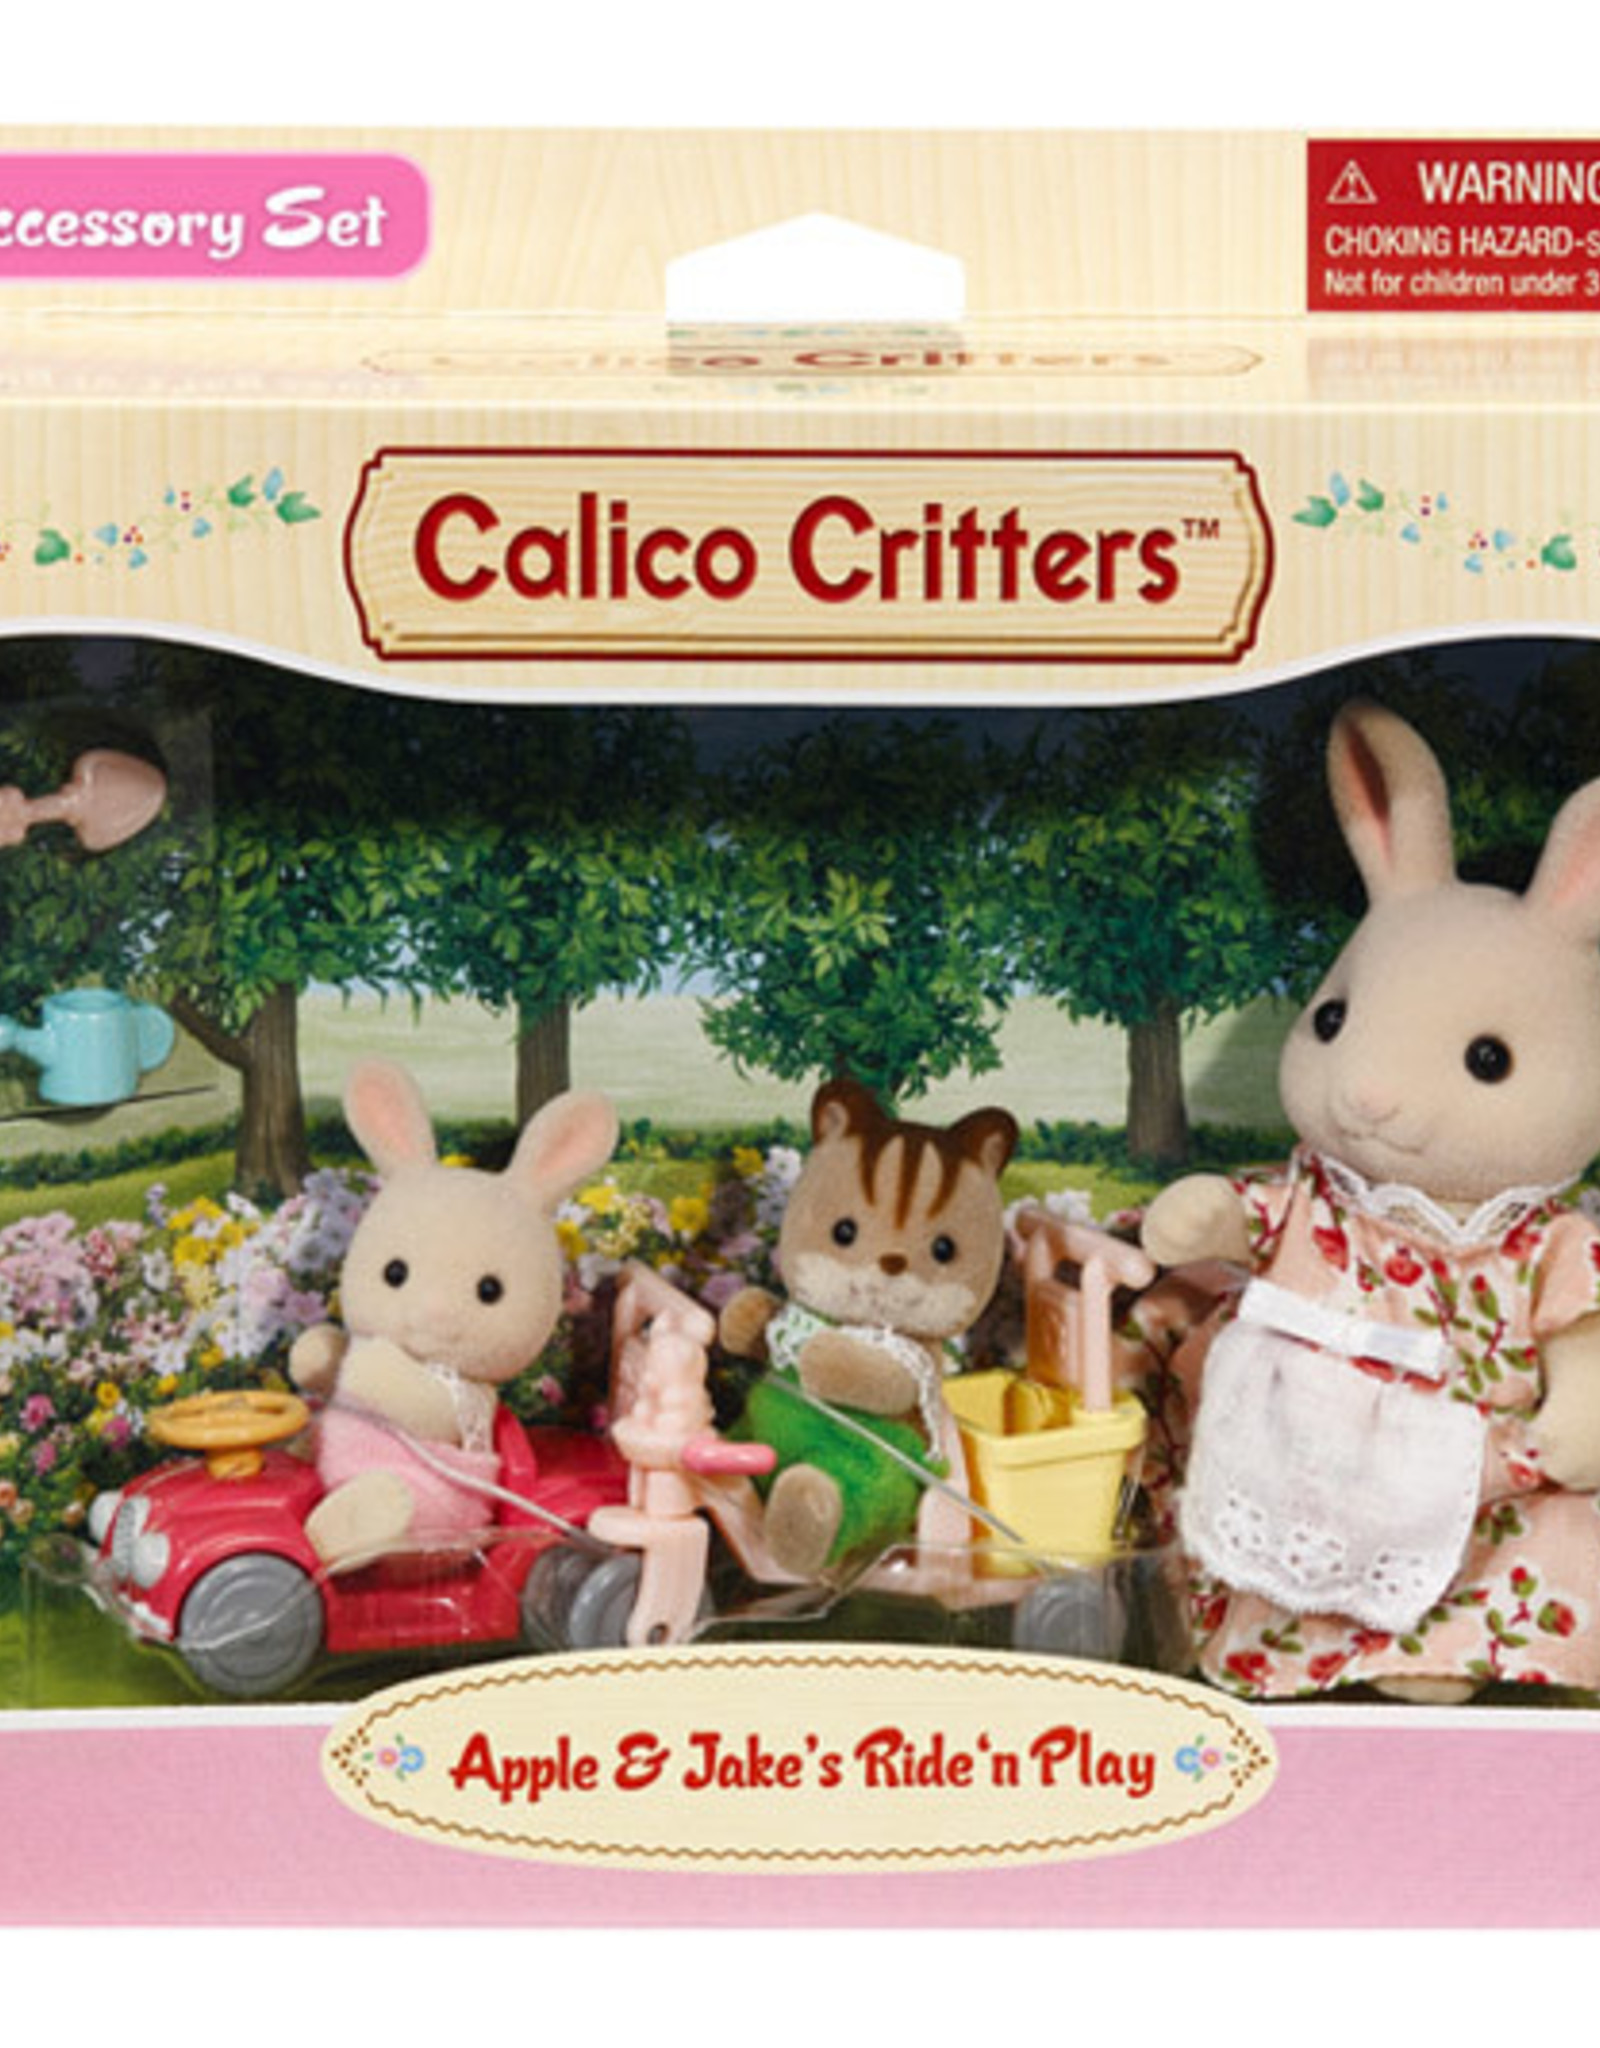 Calico Critters CC Apple & Jake's Ride n Play